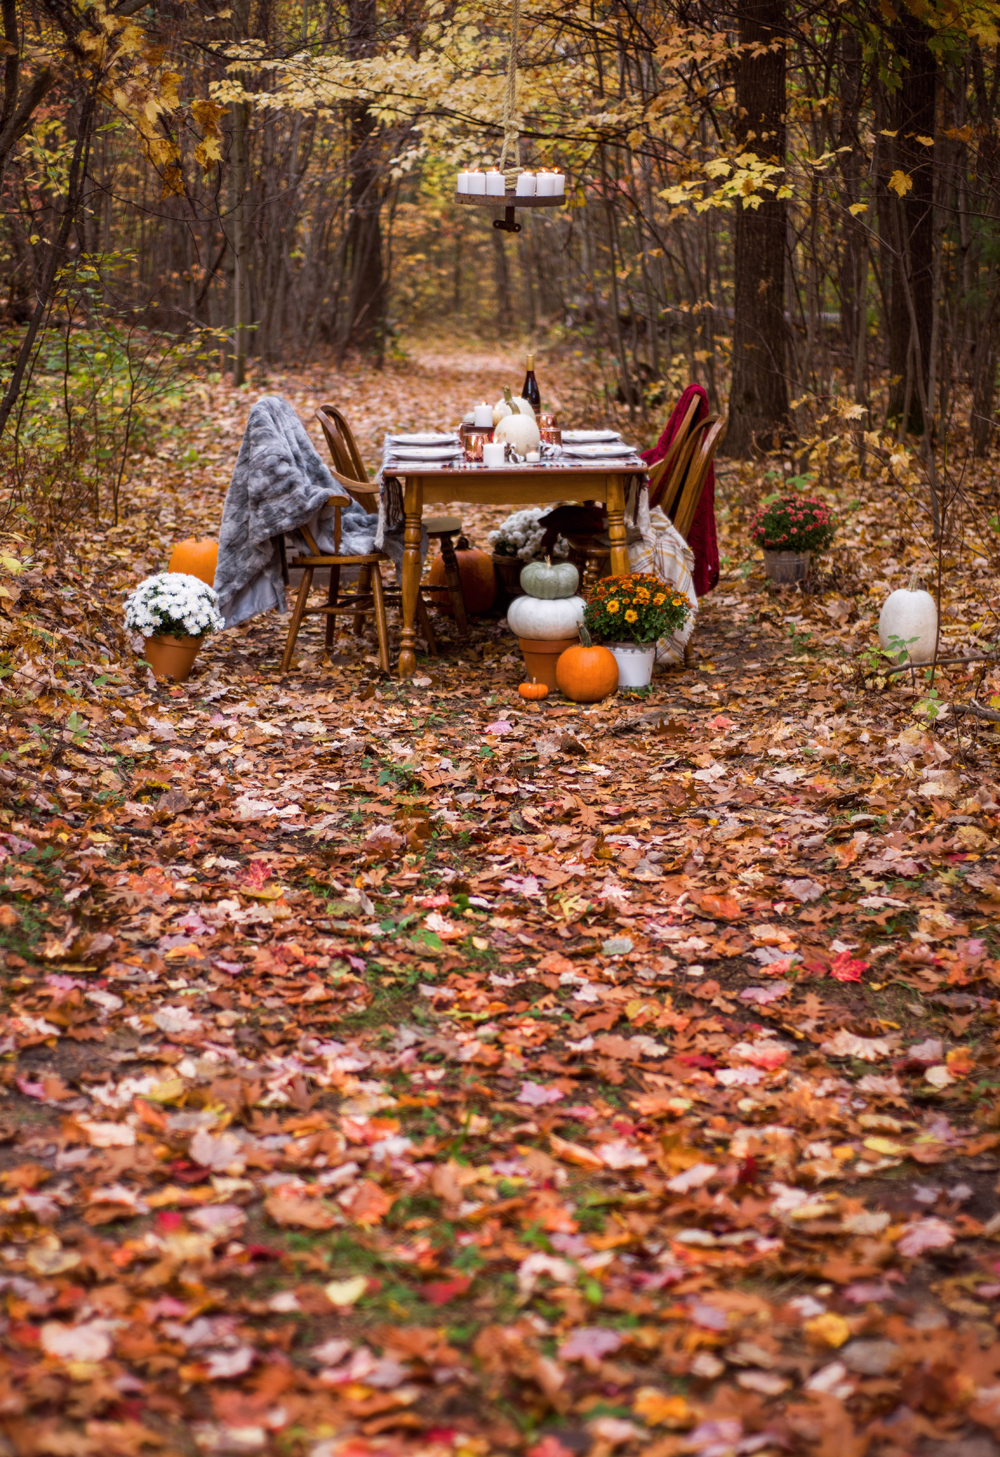 Fall Table Setting in the Woods + Mulled Wine Recipe – Charming North